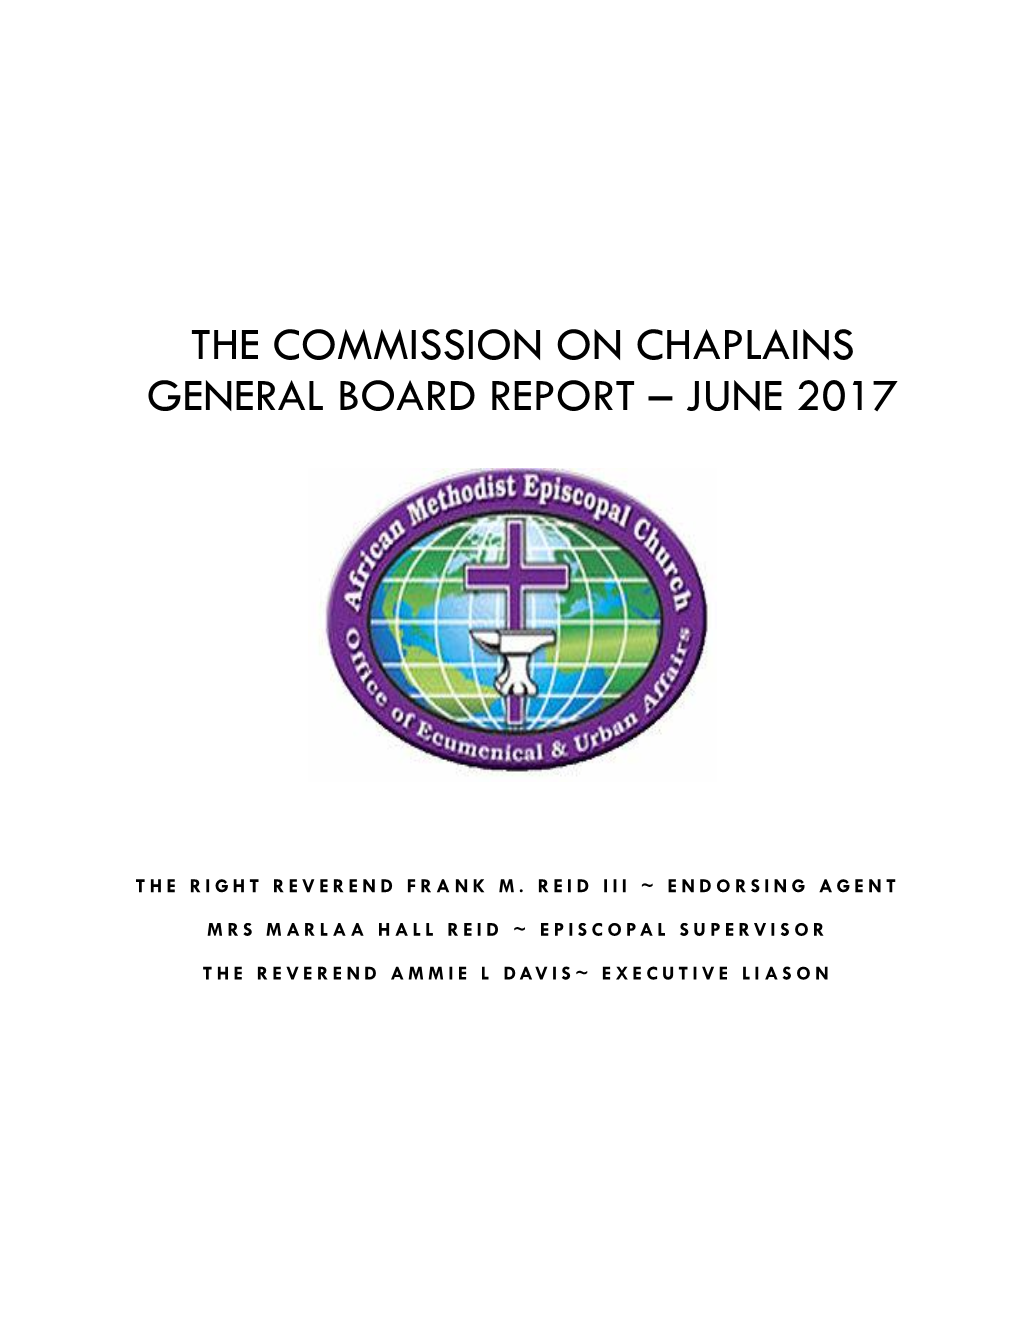 The Commission on Chaplains General Board Report – June 2017